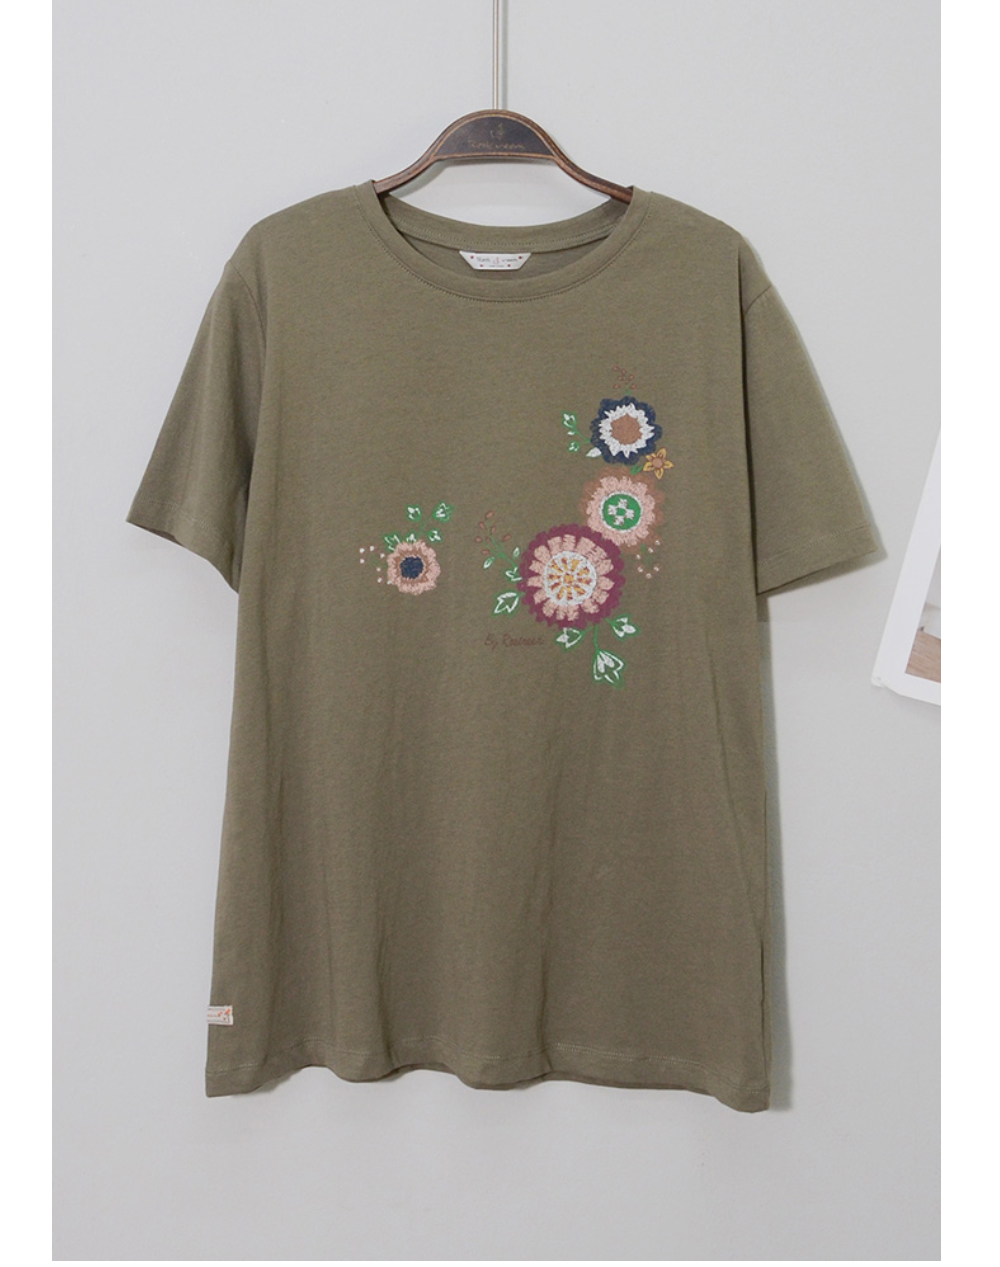 short sleeved tee oatmeal color image-S1L61